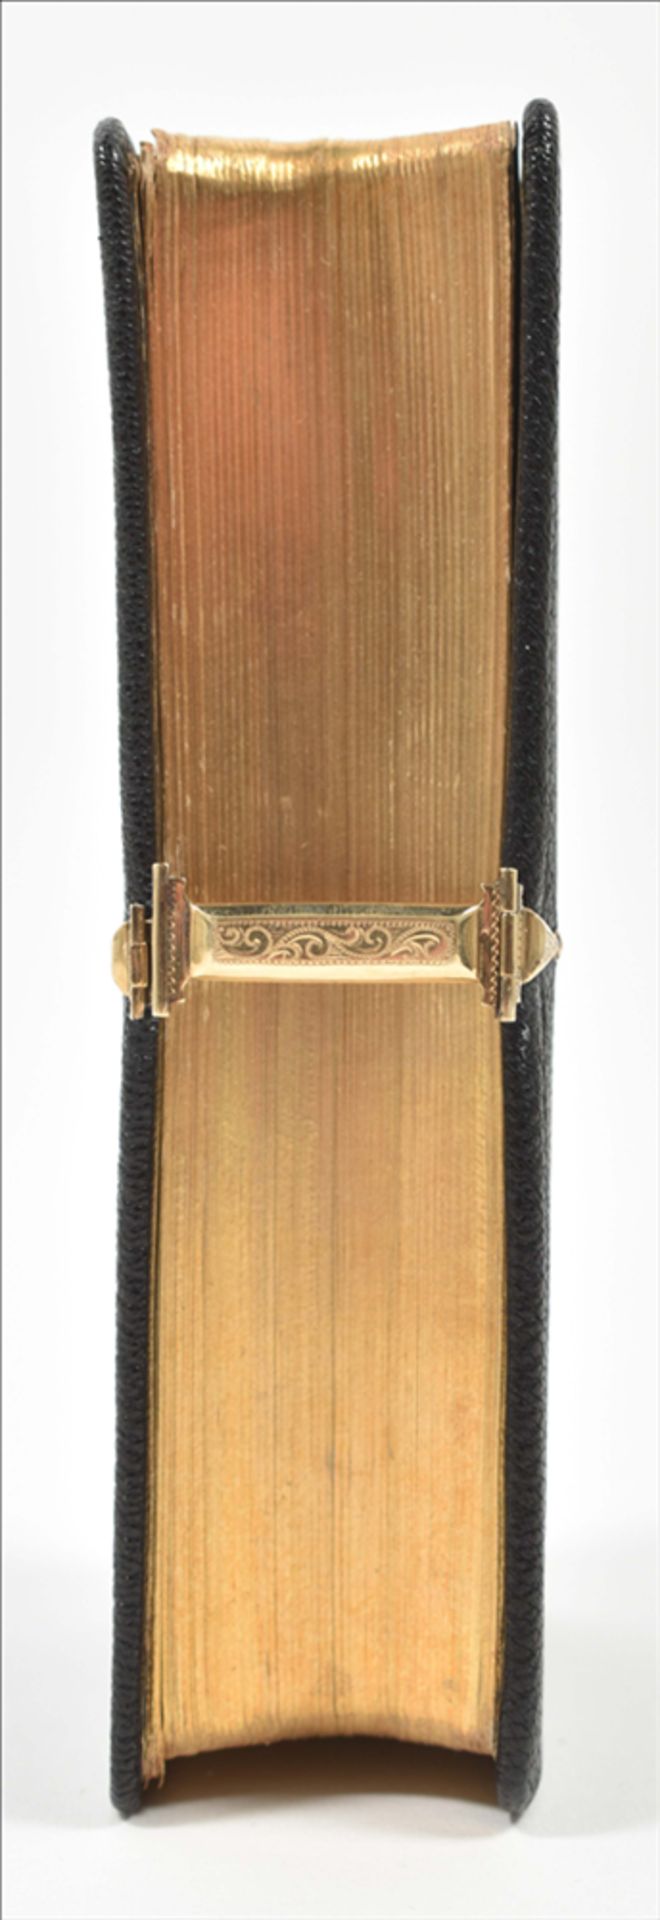 [Fine bindings] Early 20th century sharkskin binding with gold clasp - Image 5 of 8